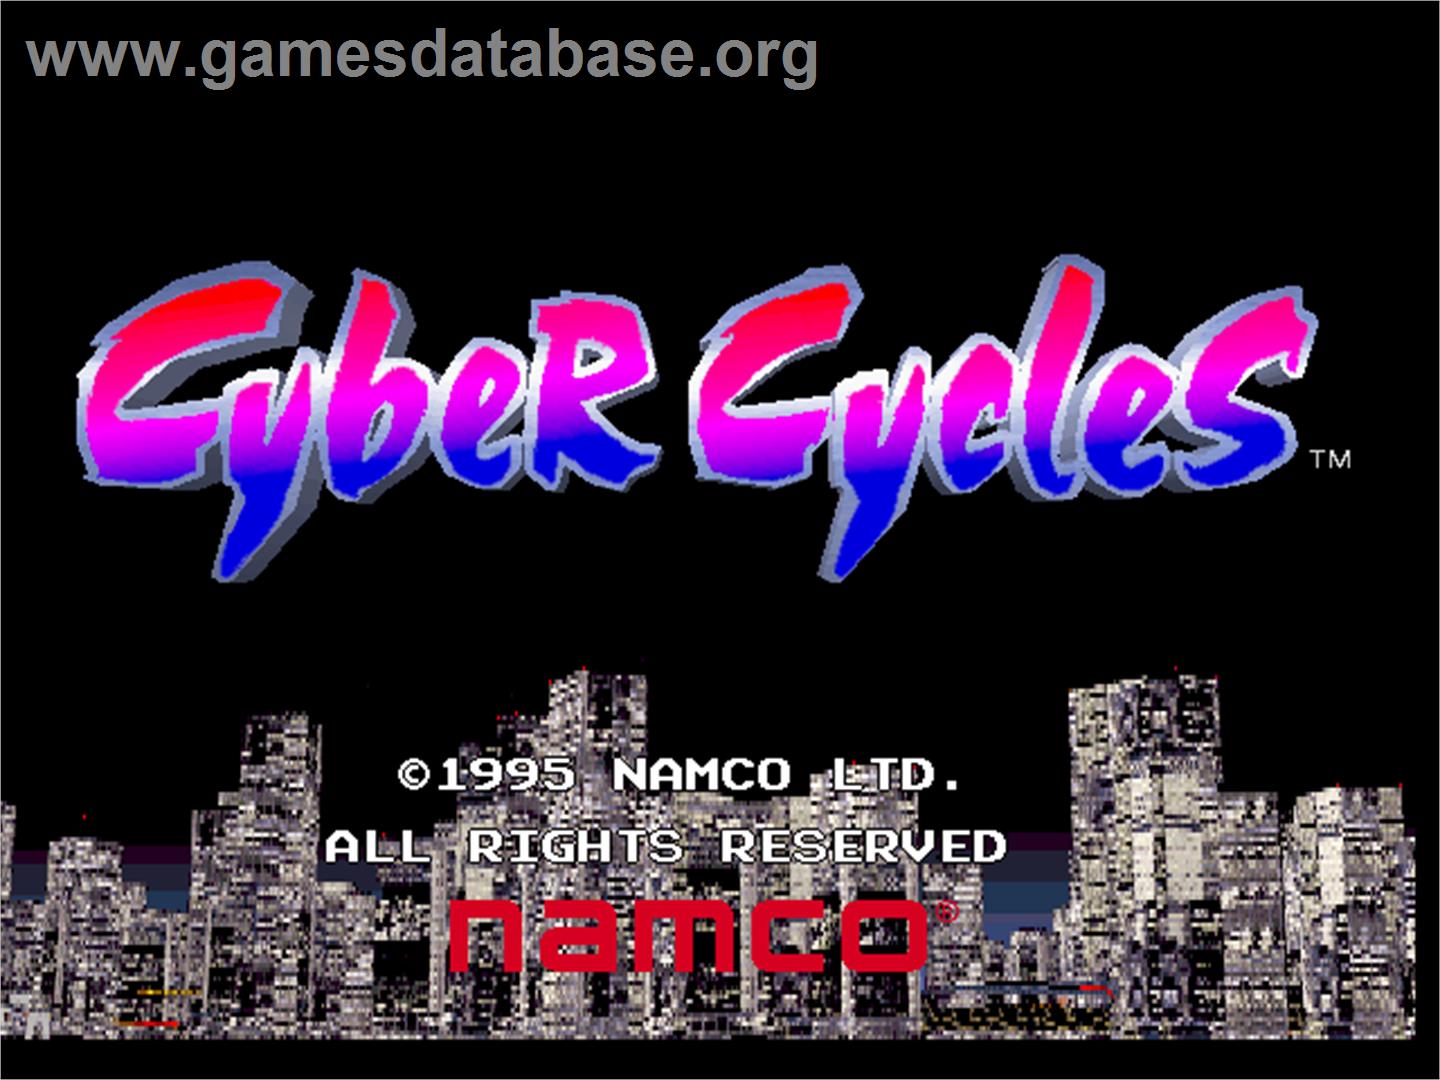 Cyber Cycles - Arcade - Artwork - Title Screen